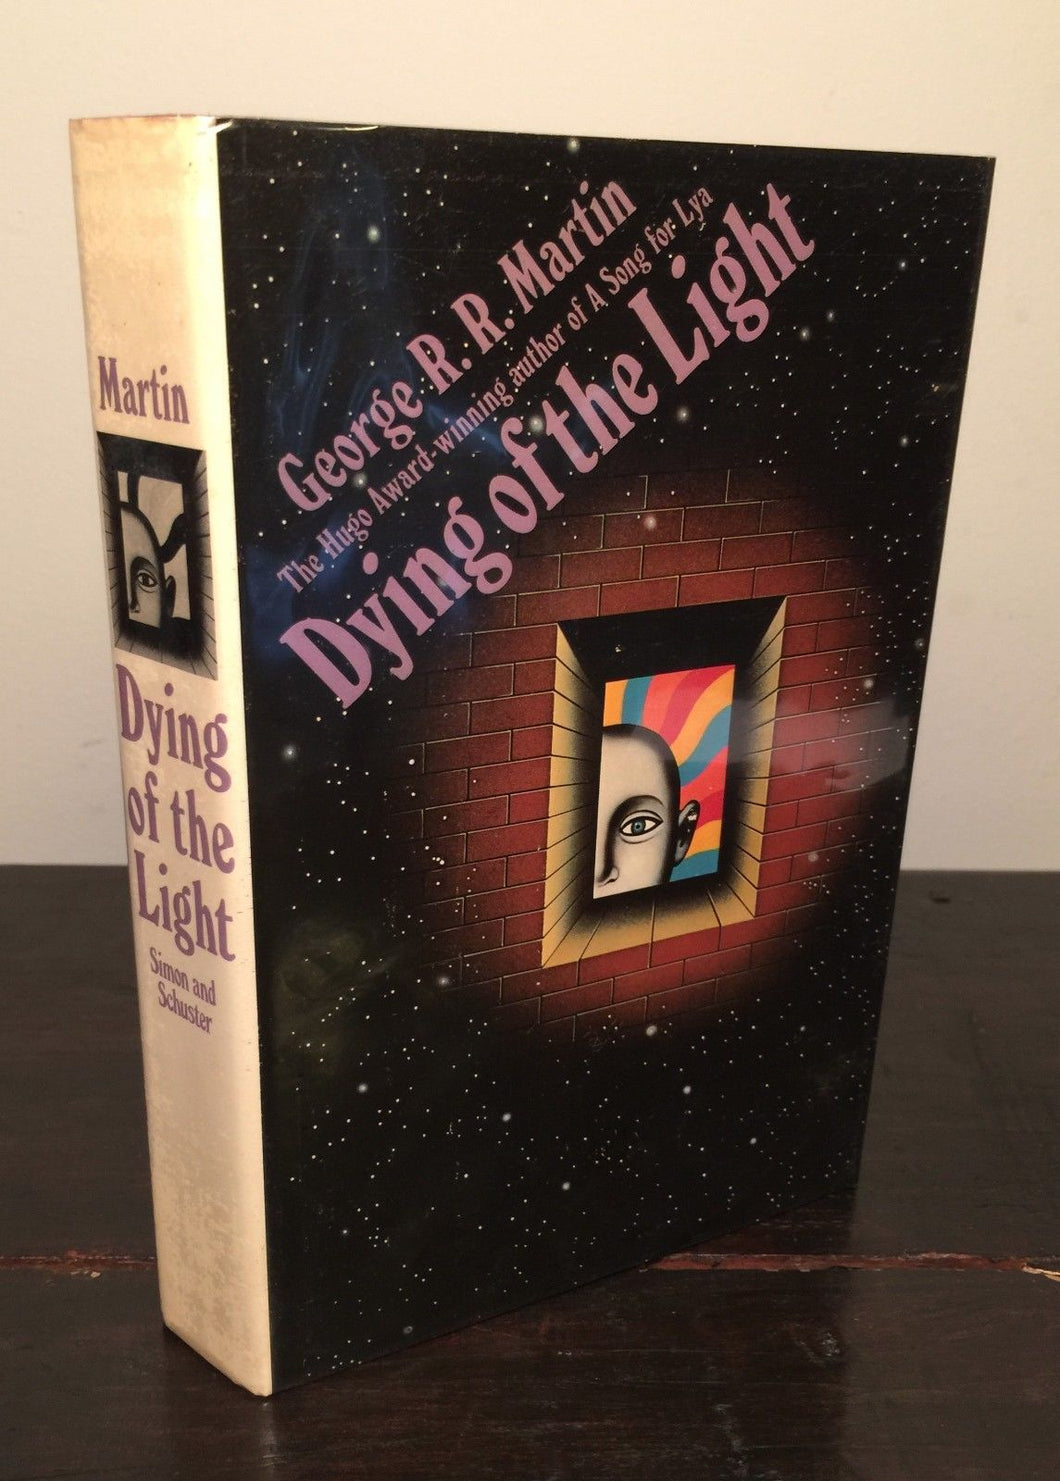 DYING OF THE LIGHT George R.R. Martin 1st/1st – 1977 HC/DJ Near Mint + SIGNED